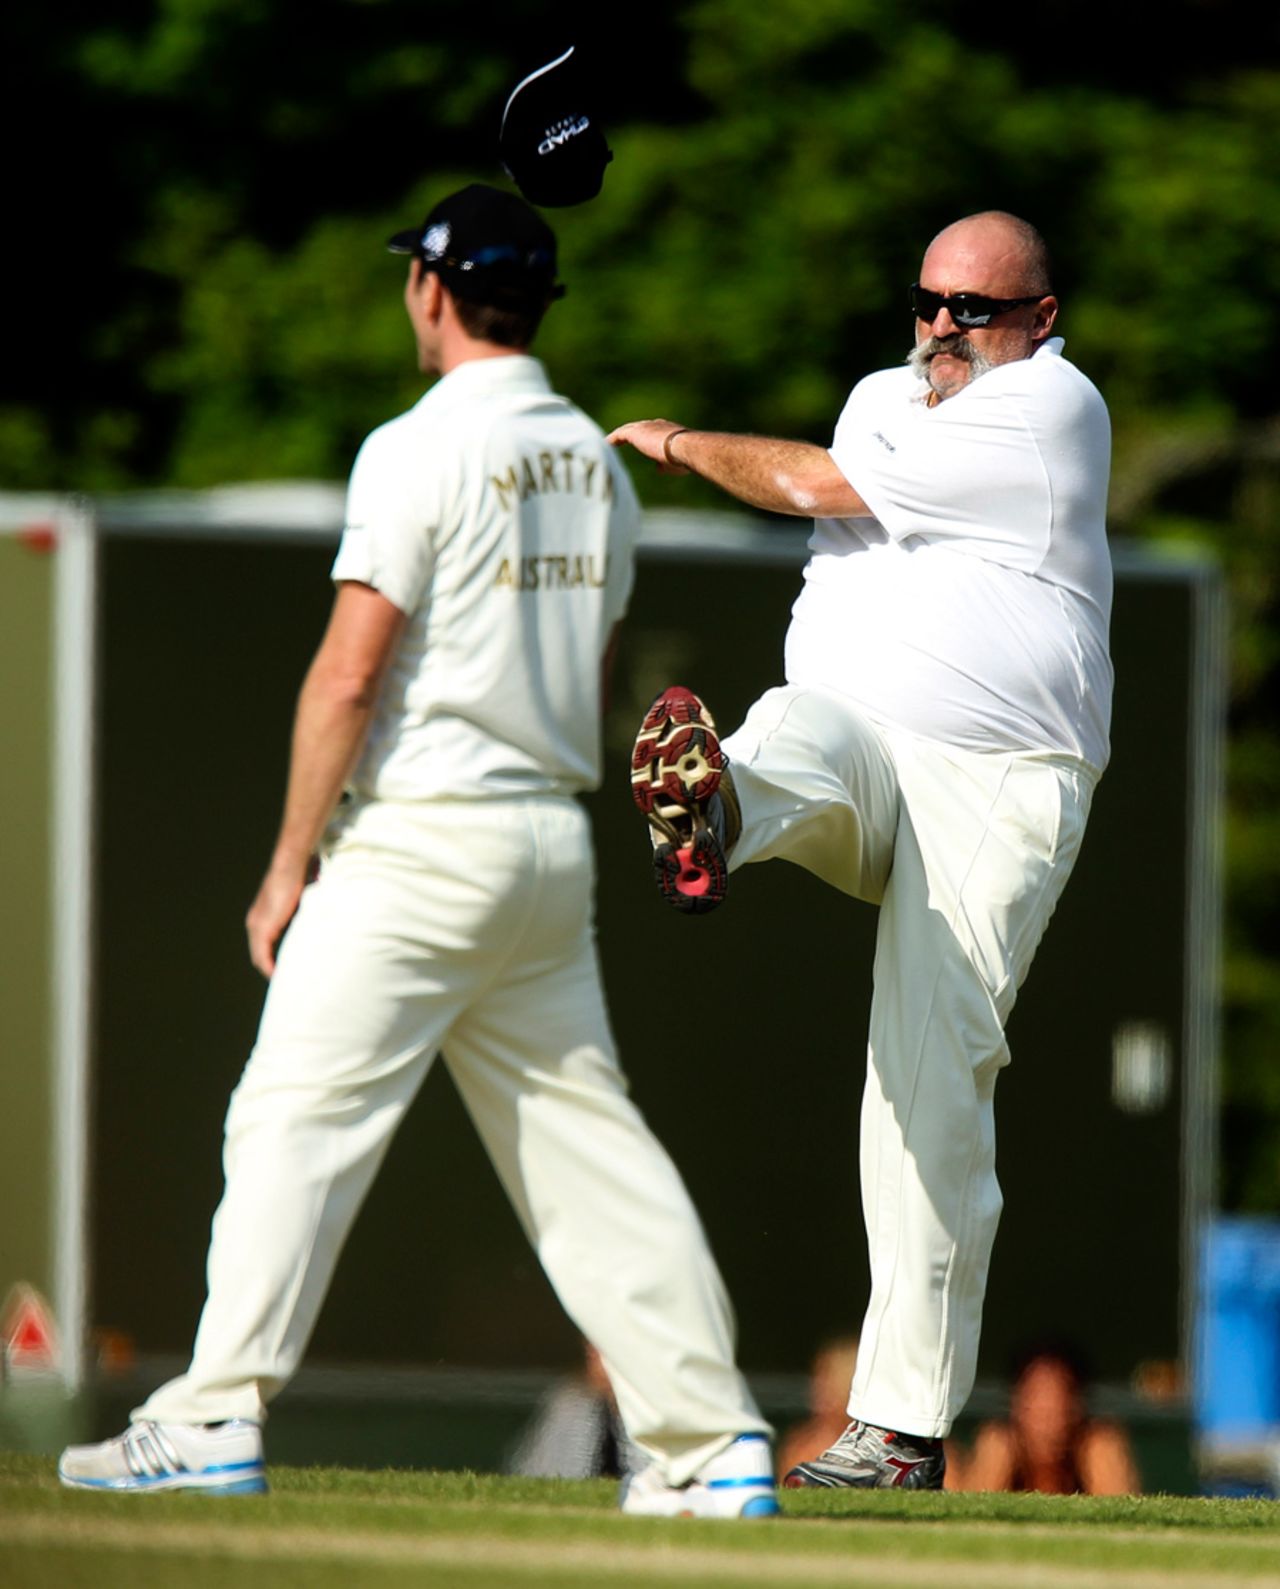 Merv Hughes vents his frustrations during a charity T20 match, Cirencester Cricket Club, June 9, 2013